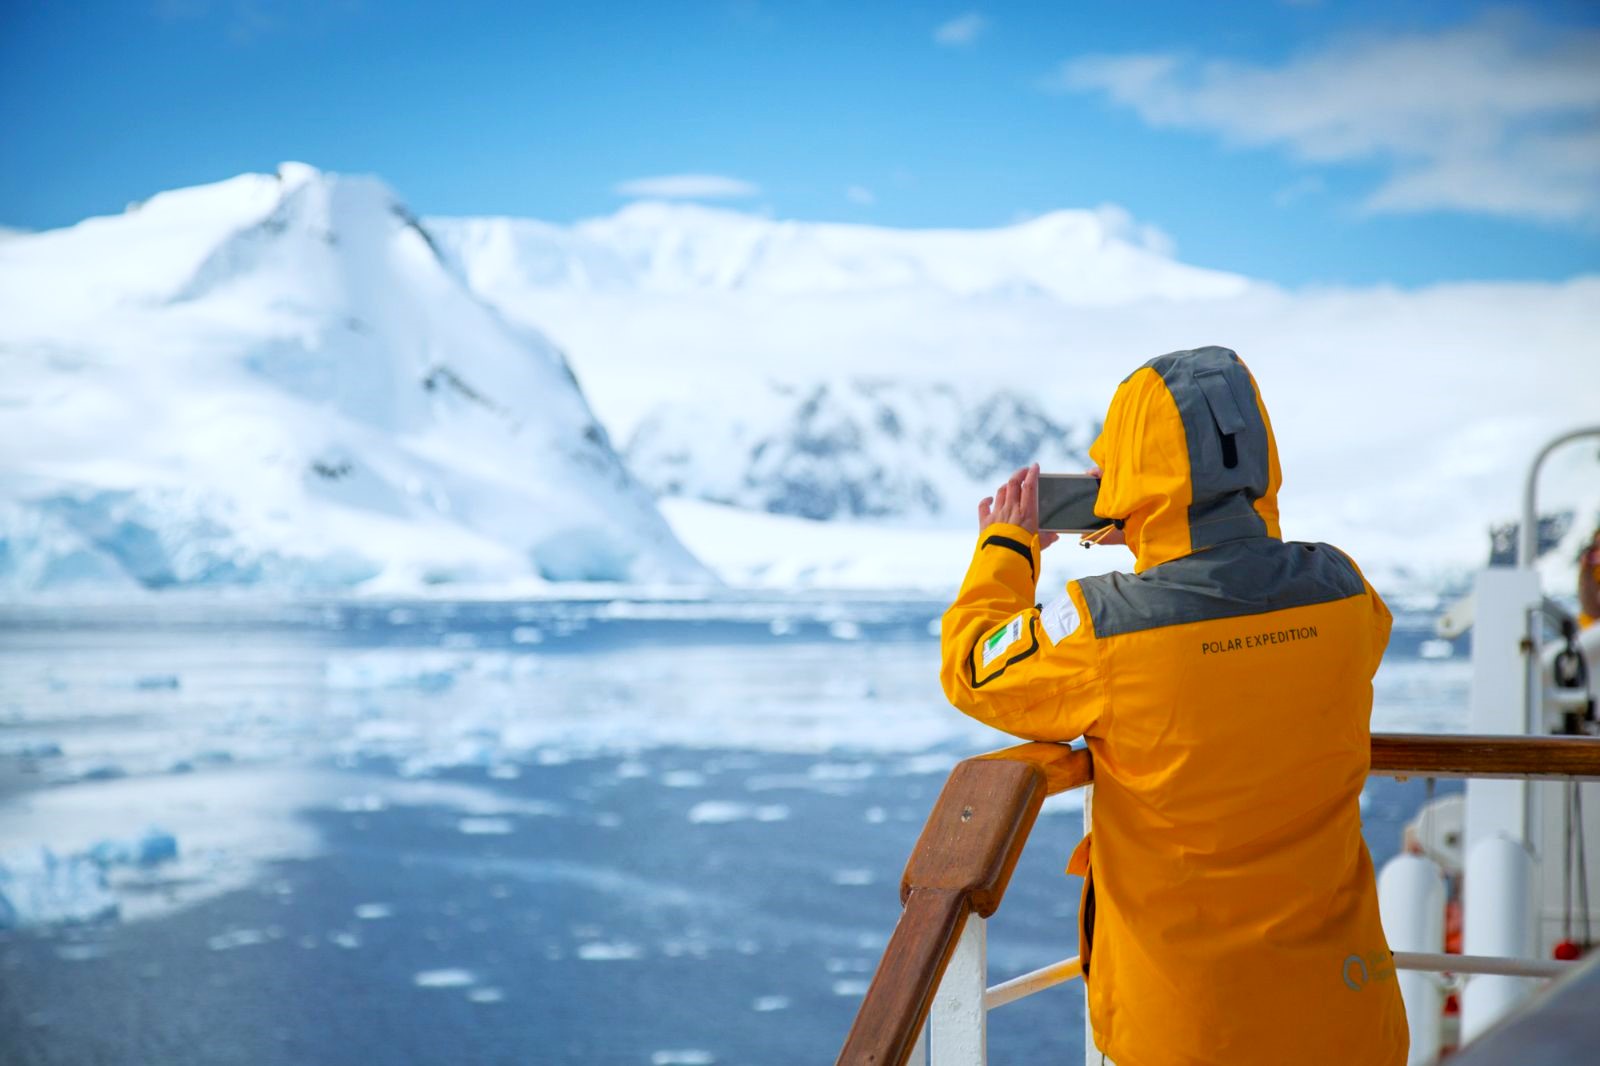 A guest onboard the Quark Ultramarine taking a photograph of the Antarctic scenery